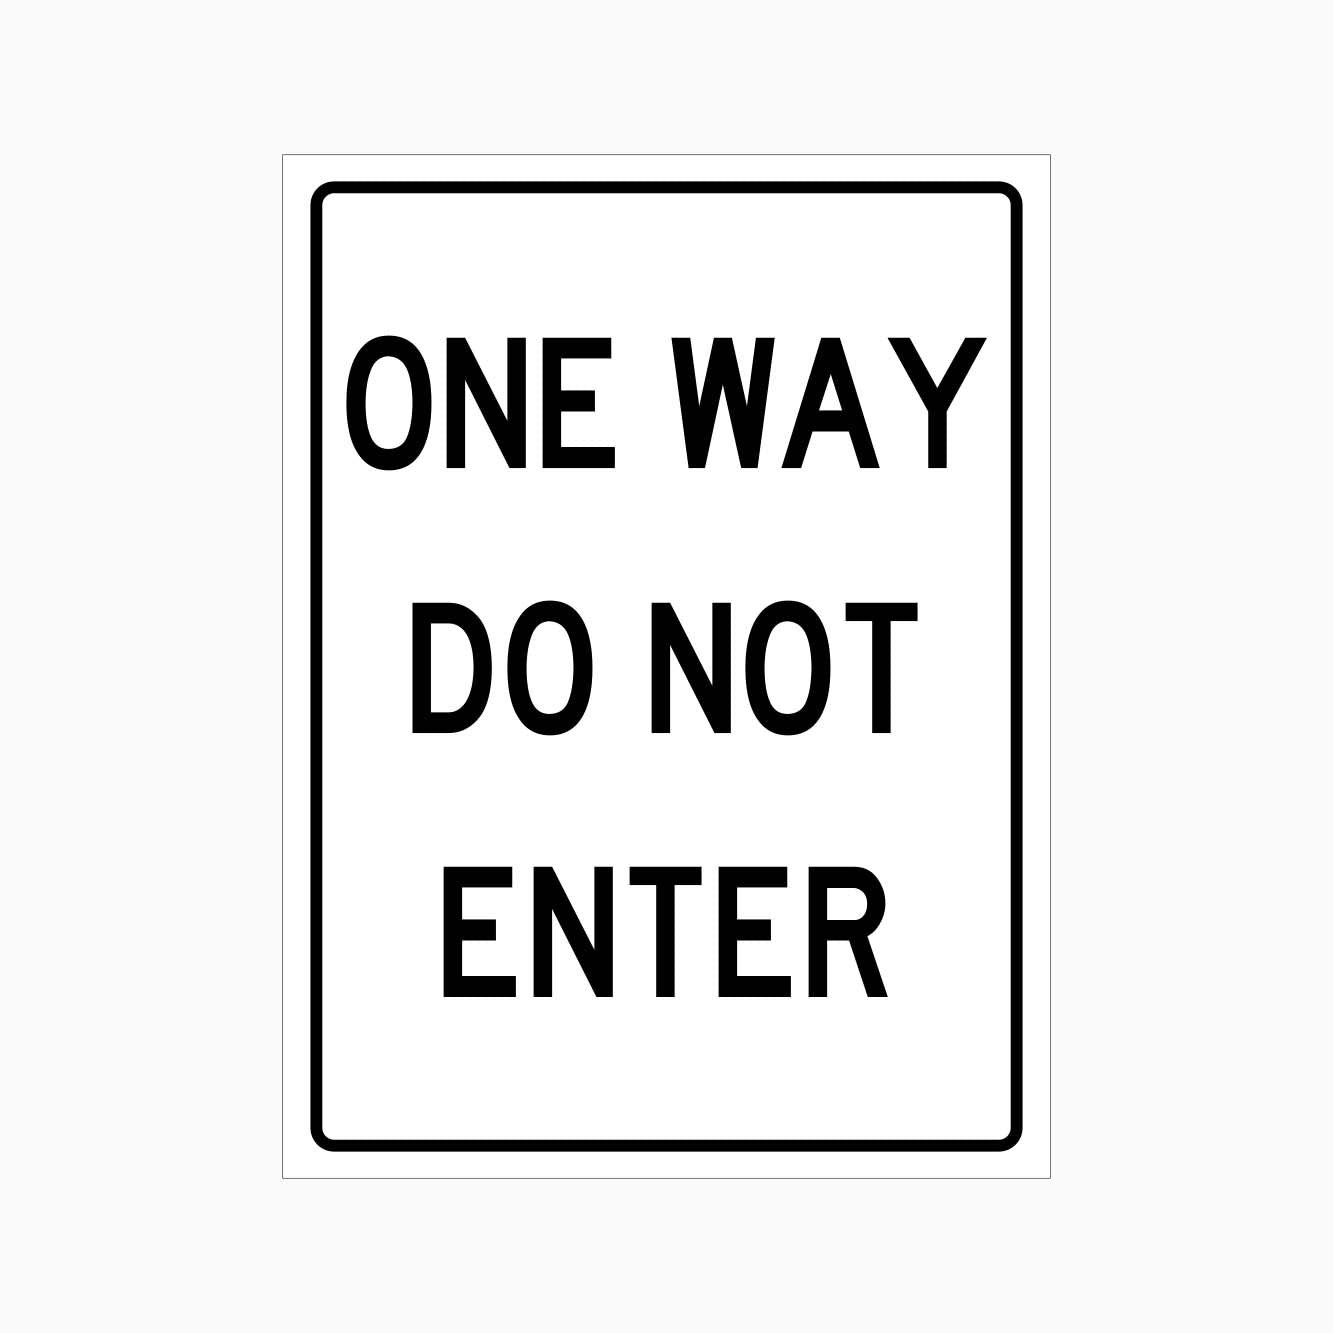 ONE WAY DO NOT ENTER SIGN - GET SIGNS